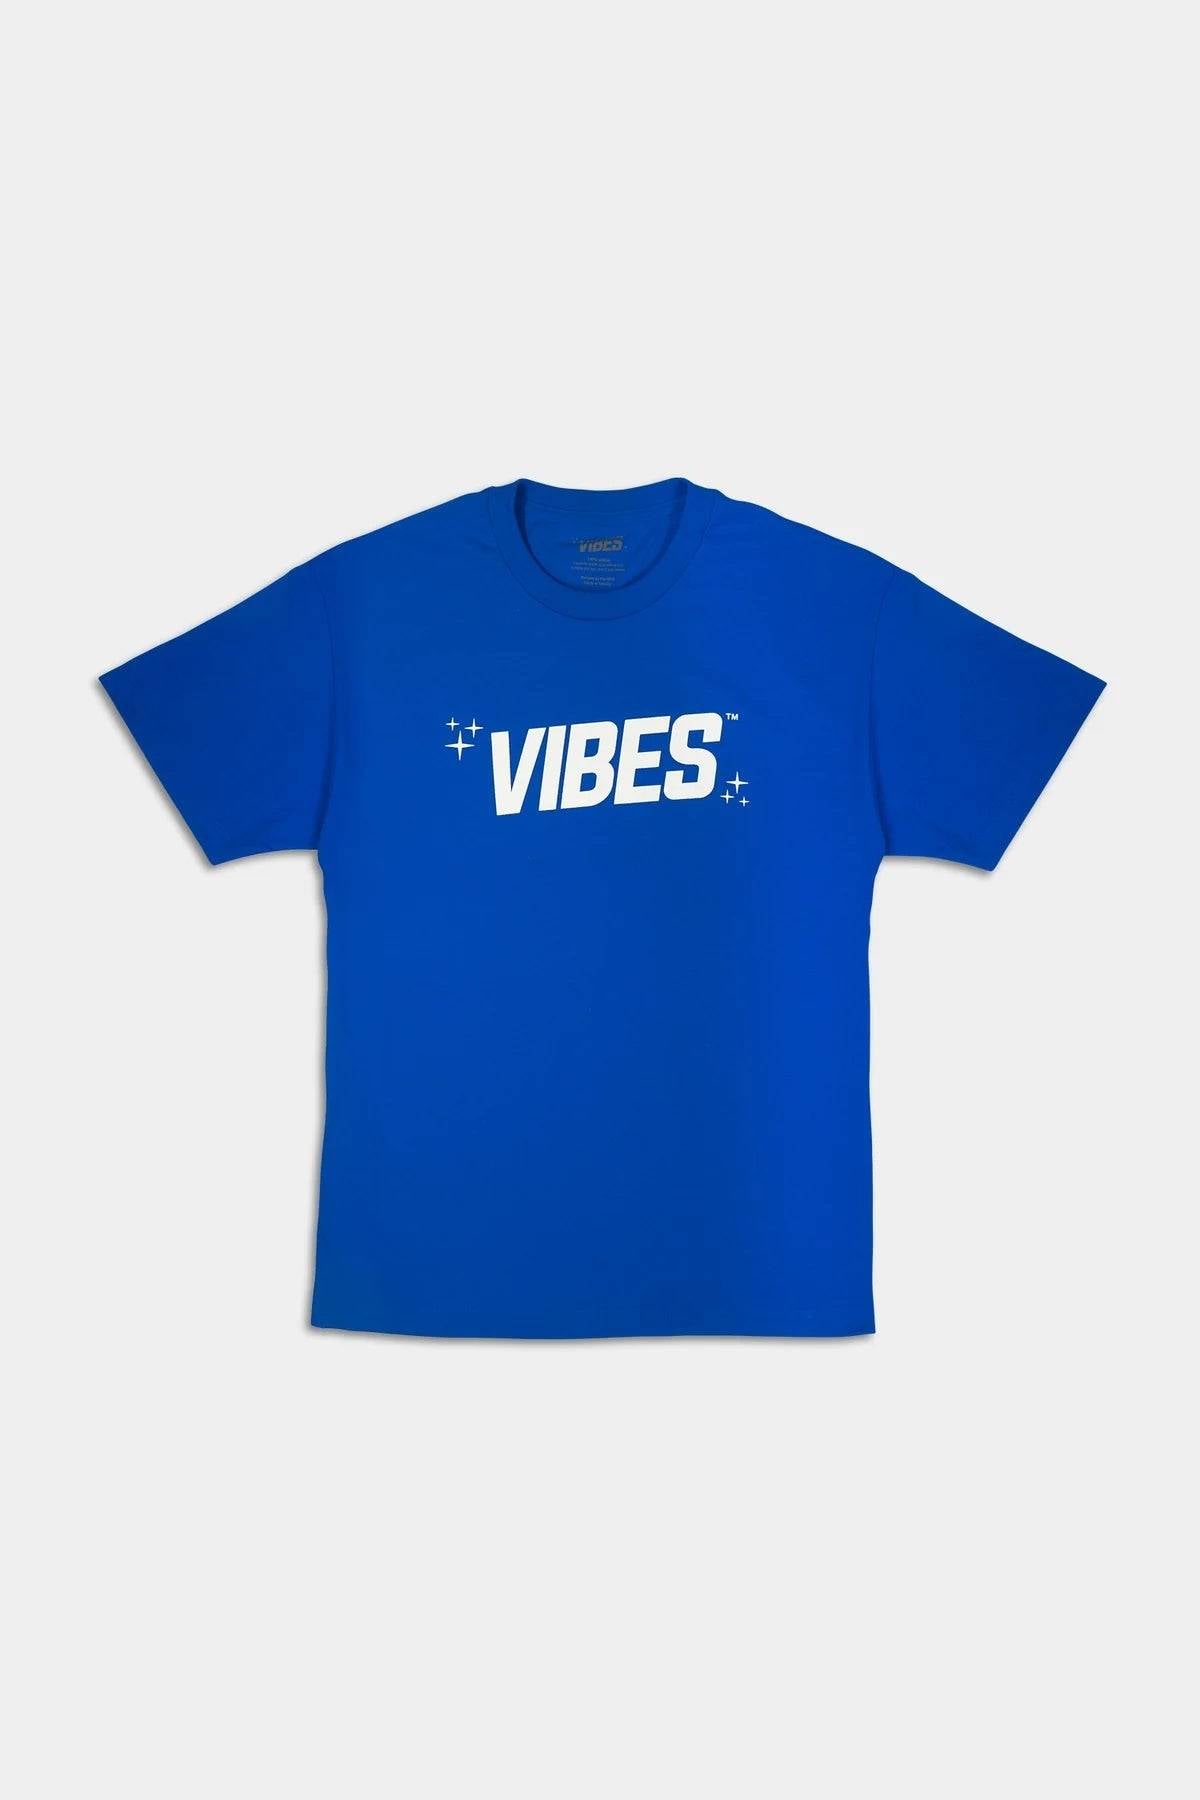 VIBES Blue With White Logo T-Shirt 2X-Large